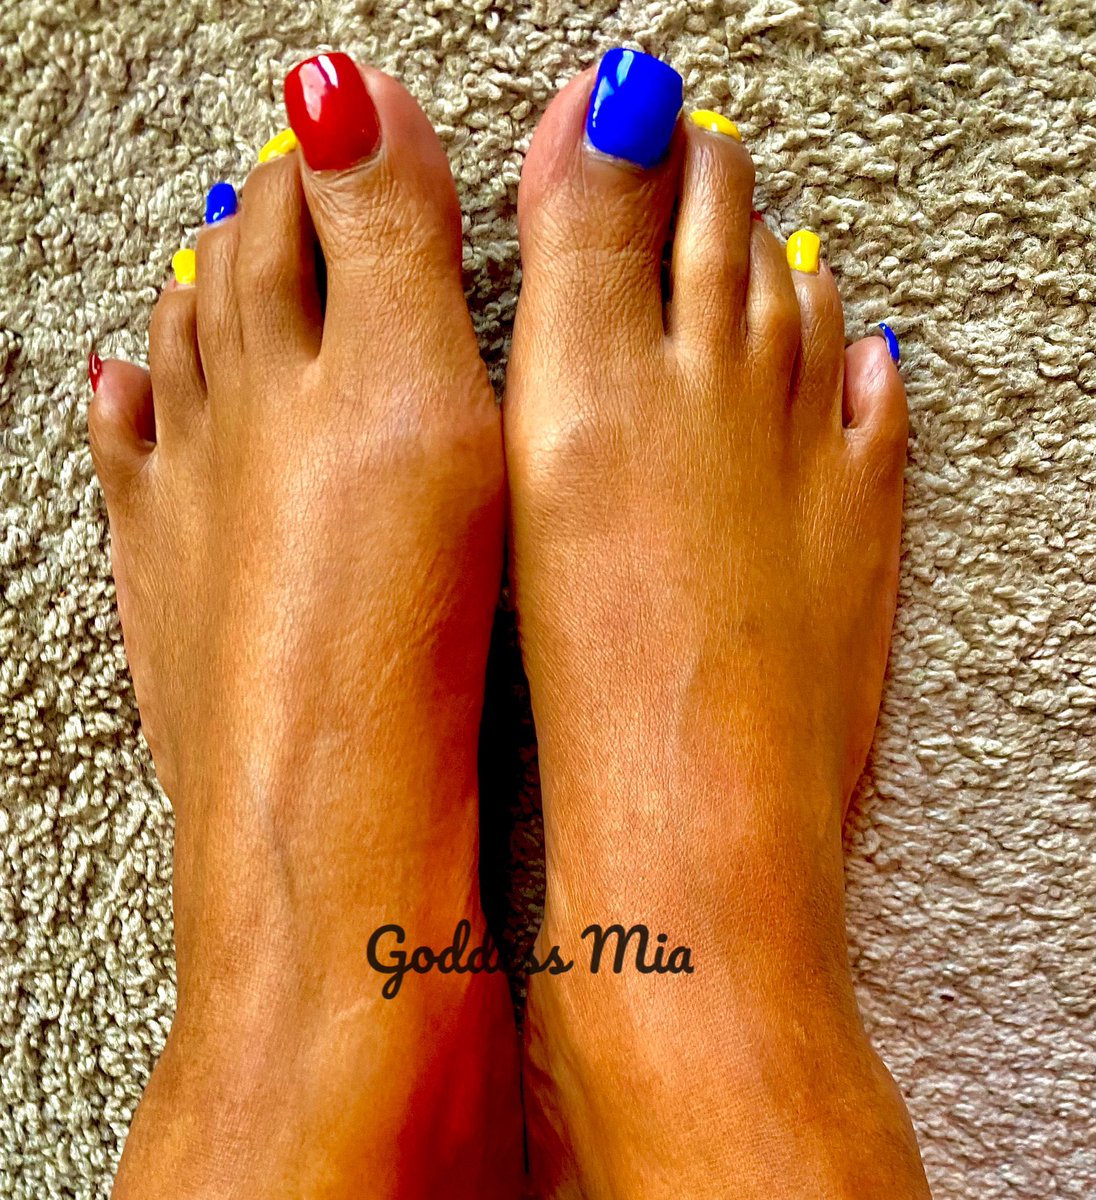 Last days for this polish. What should I change to?

Booking April

#footworship #newpolish #footgoddess #inpersonsessions 
#chicago